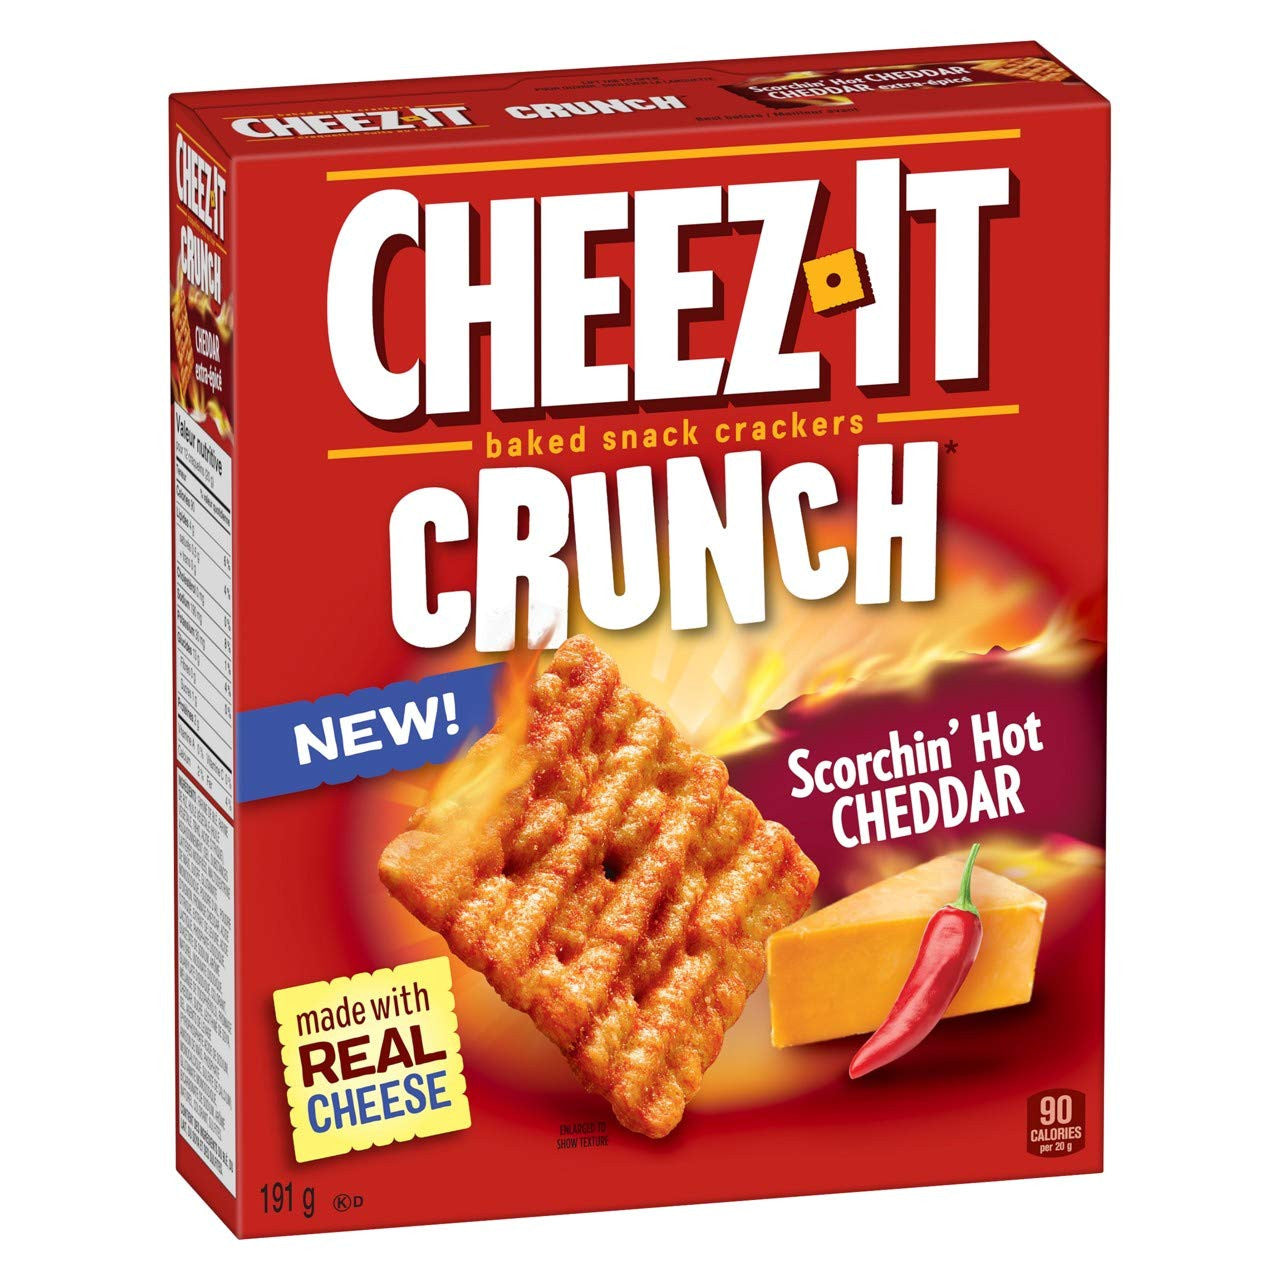 Cheez-It Baked Snack Crackers Crunch Scorchin' Hot Cheddar, 191g/6.7oz., {Imported from Canada}